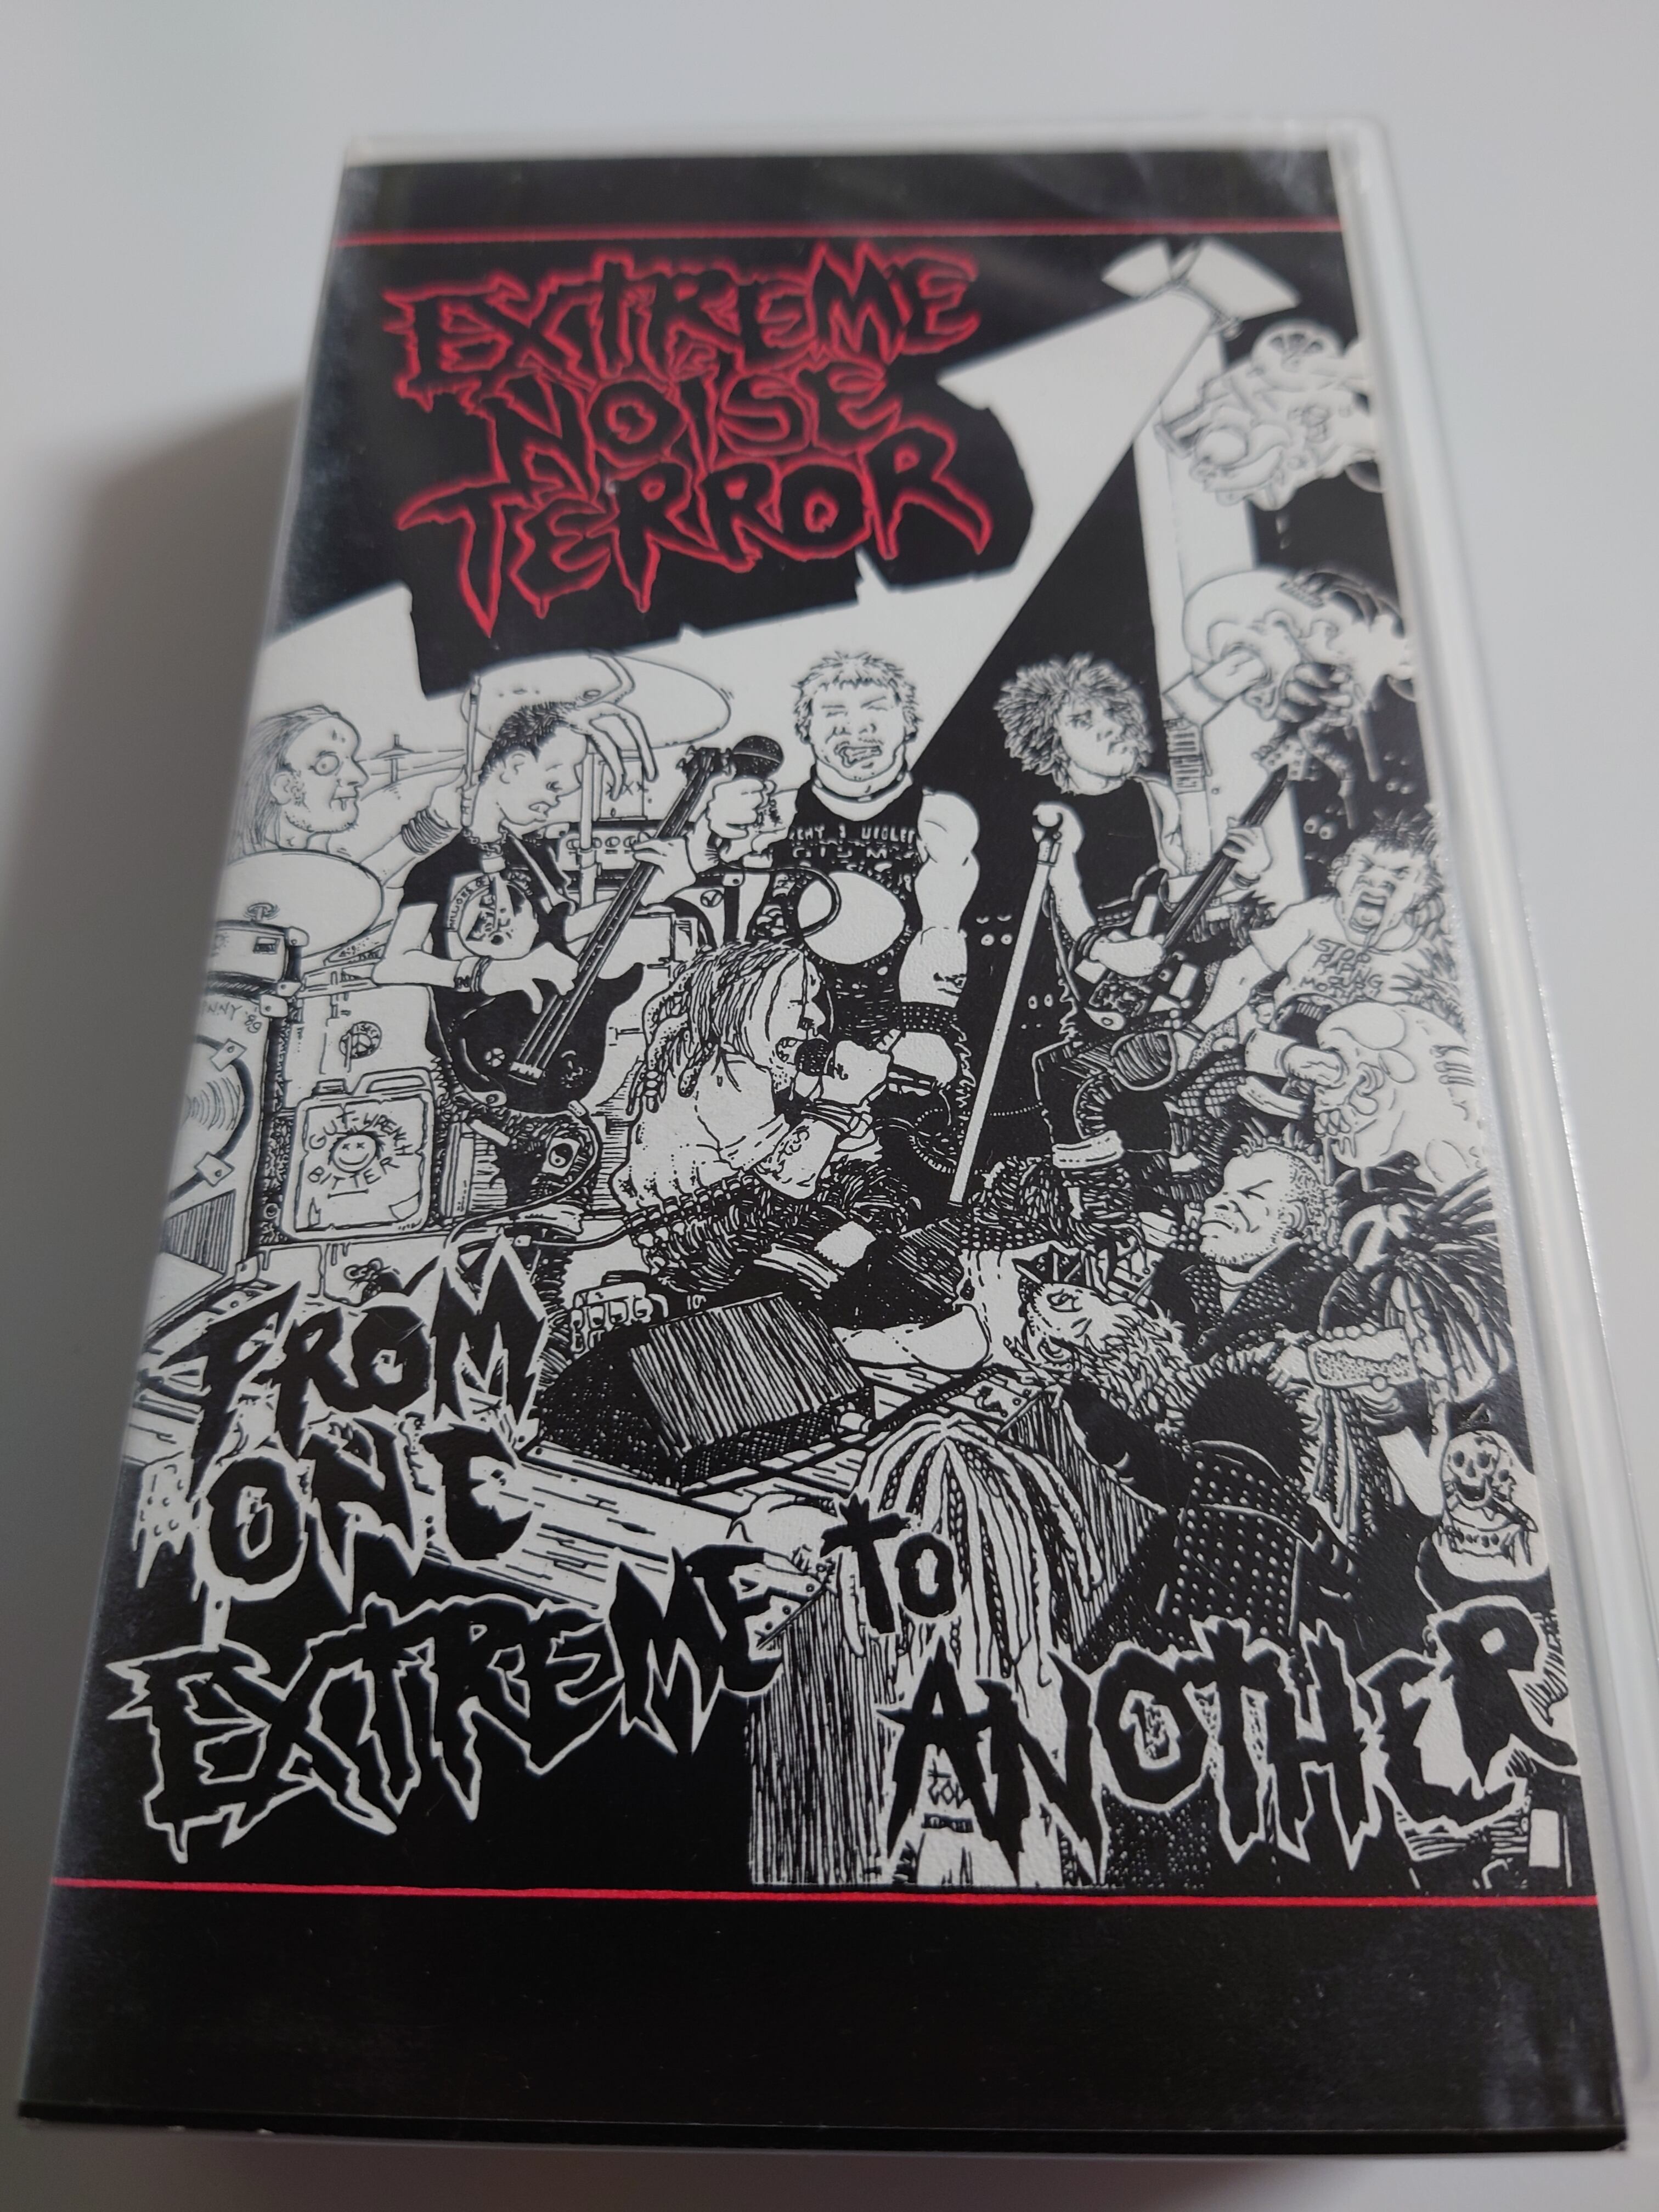 EXTREME NOISE TERROR/LIVE AT THE FULLHAM GREYHOUND LONDON RECORD SHOP  CONQUEST/レコードショップコンクエスト